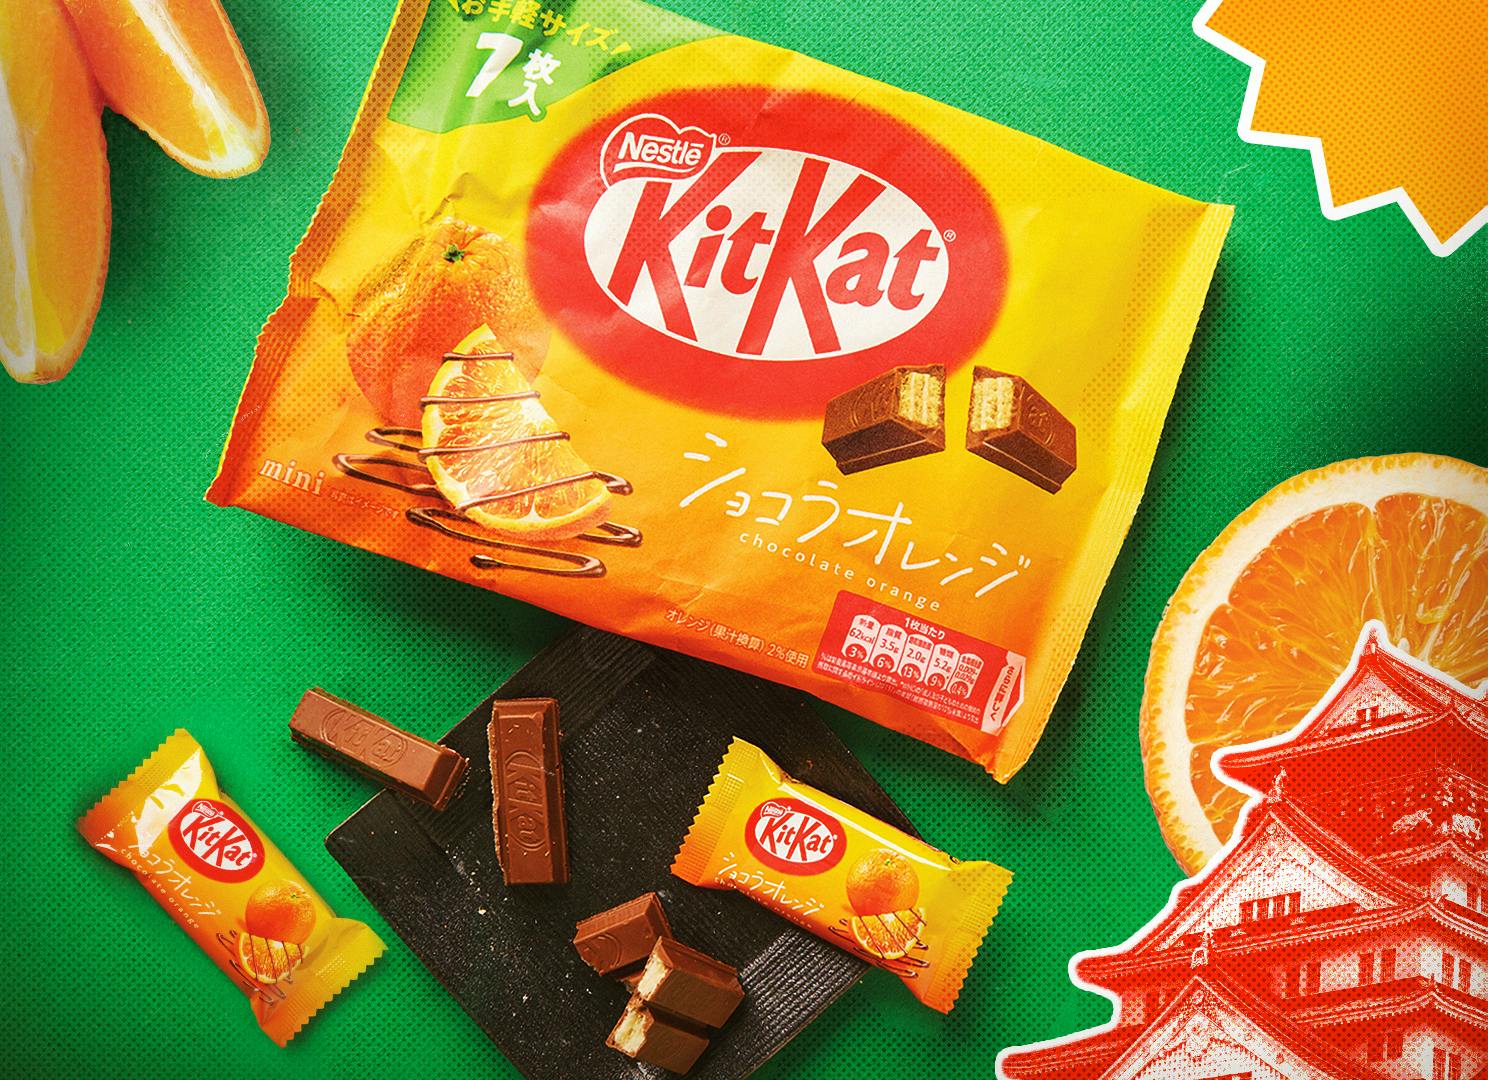 The orange package of KitKat Chocolate Orange is pictured on a green background with the Osaka Castle